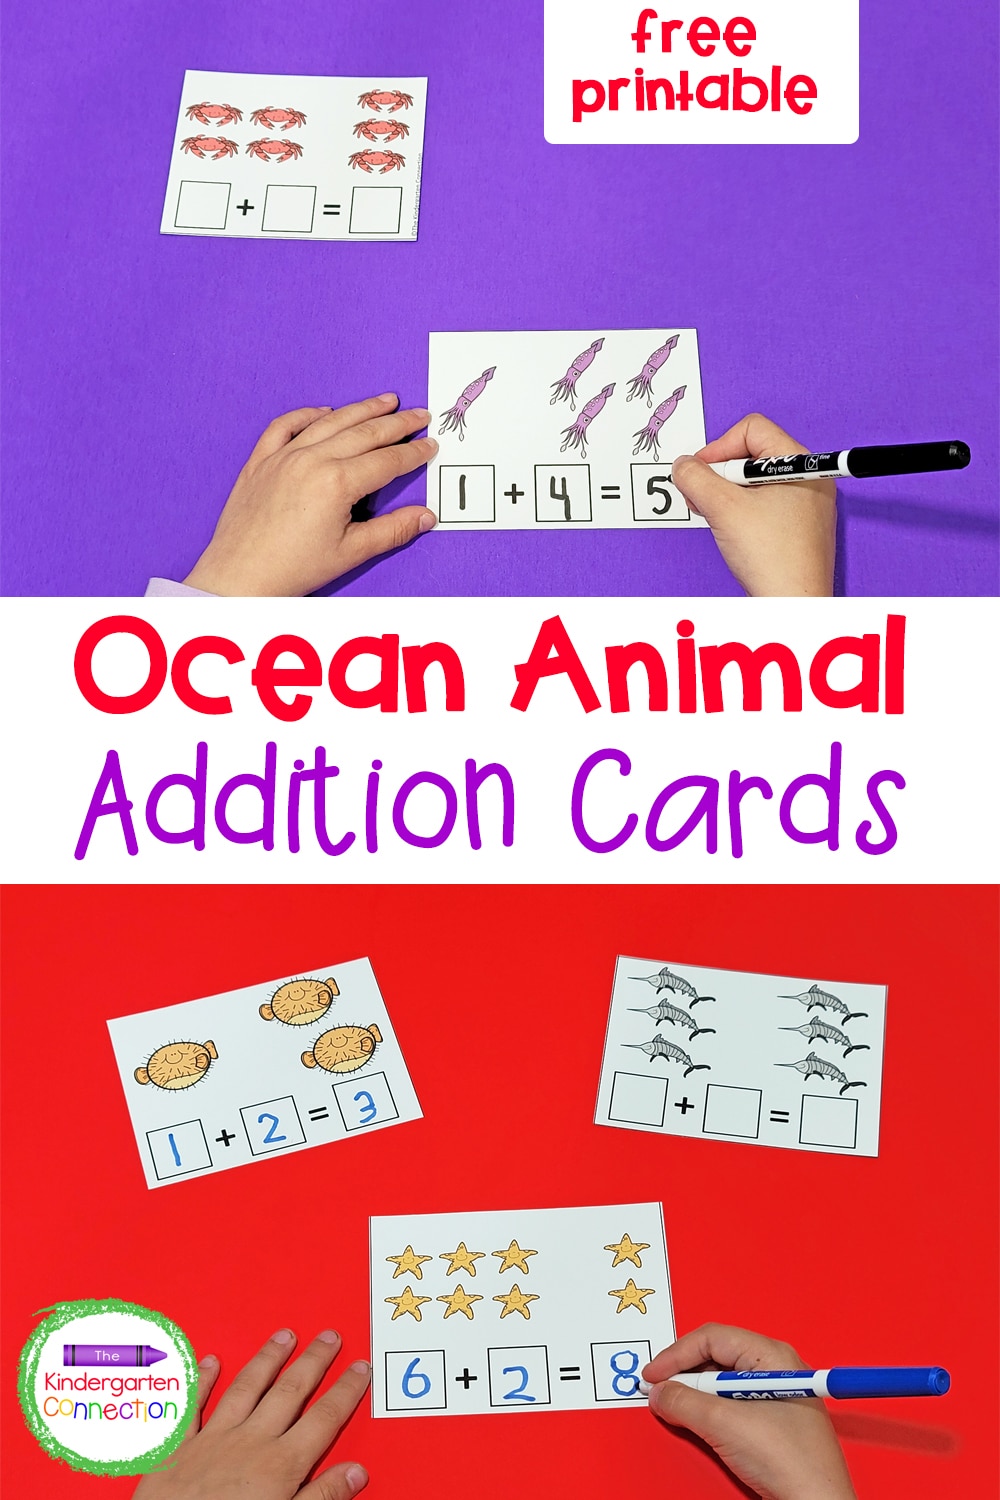 Have fun working on addition with these free Ocean Animal Addition Cards. They're perfect for bringing the ocean fun to your math centers!